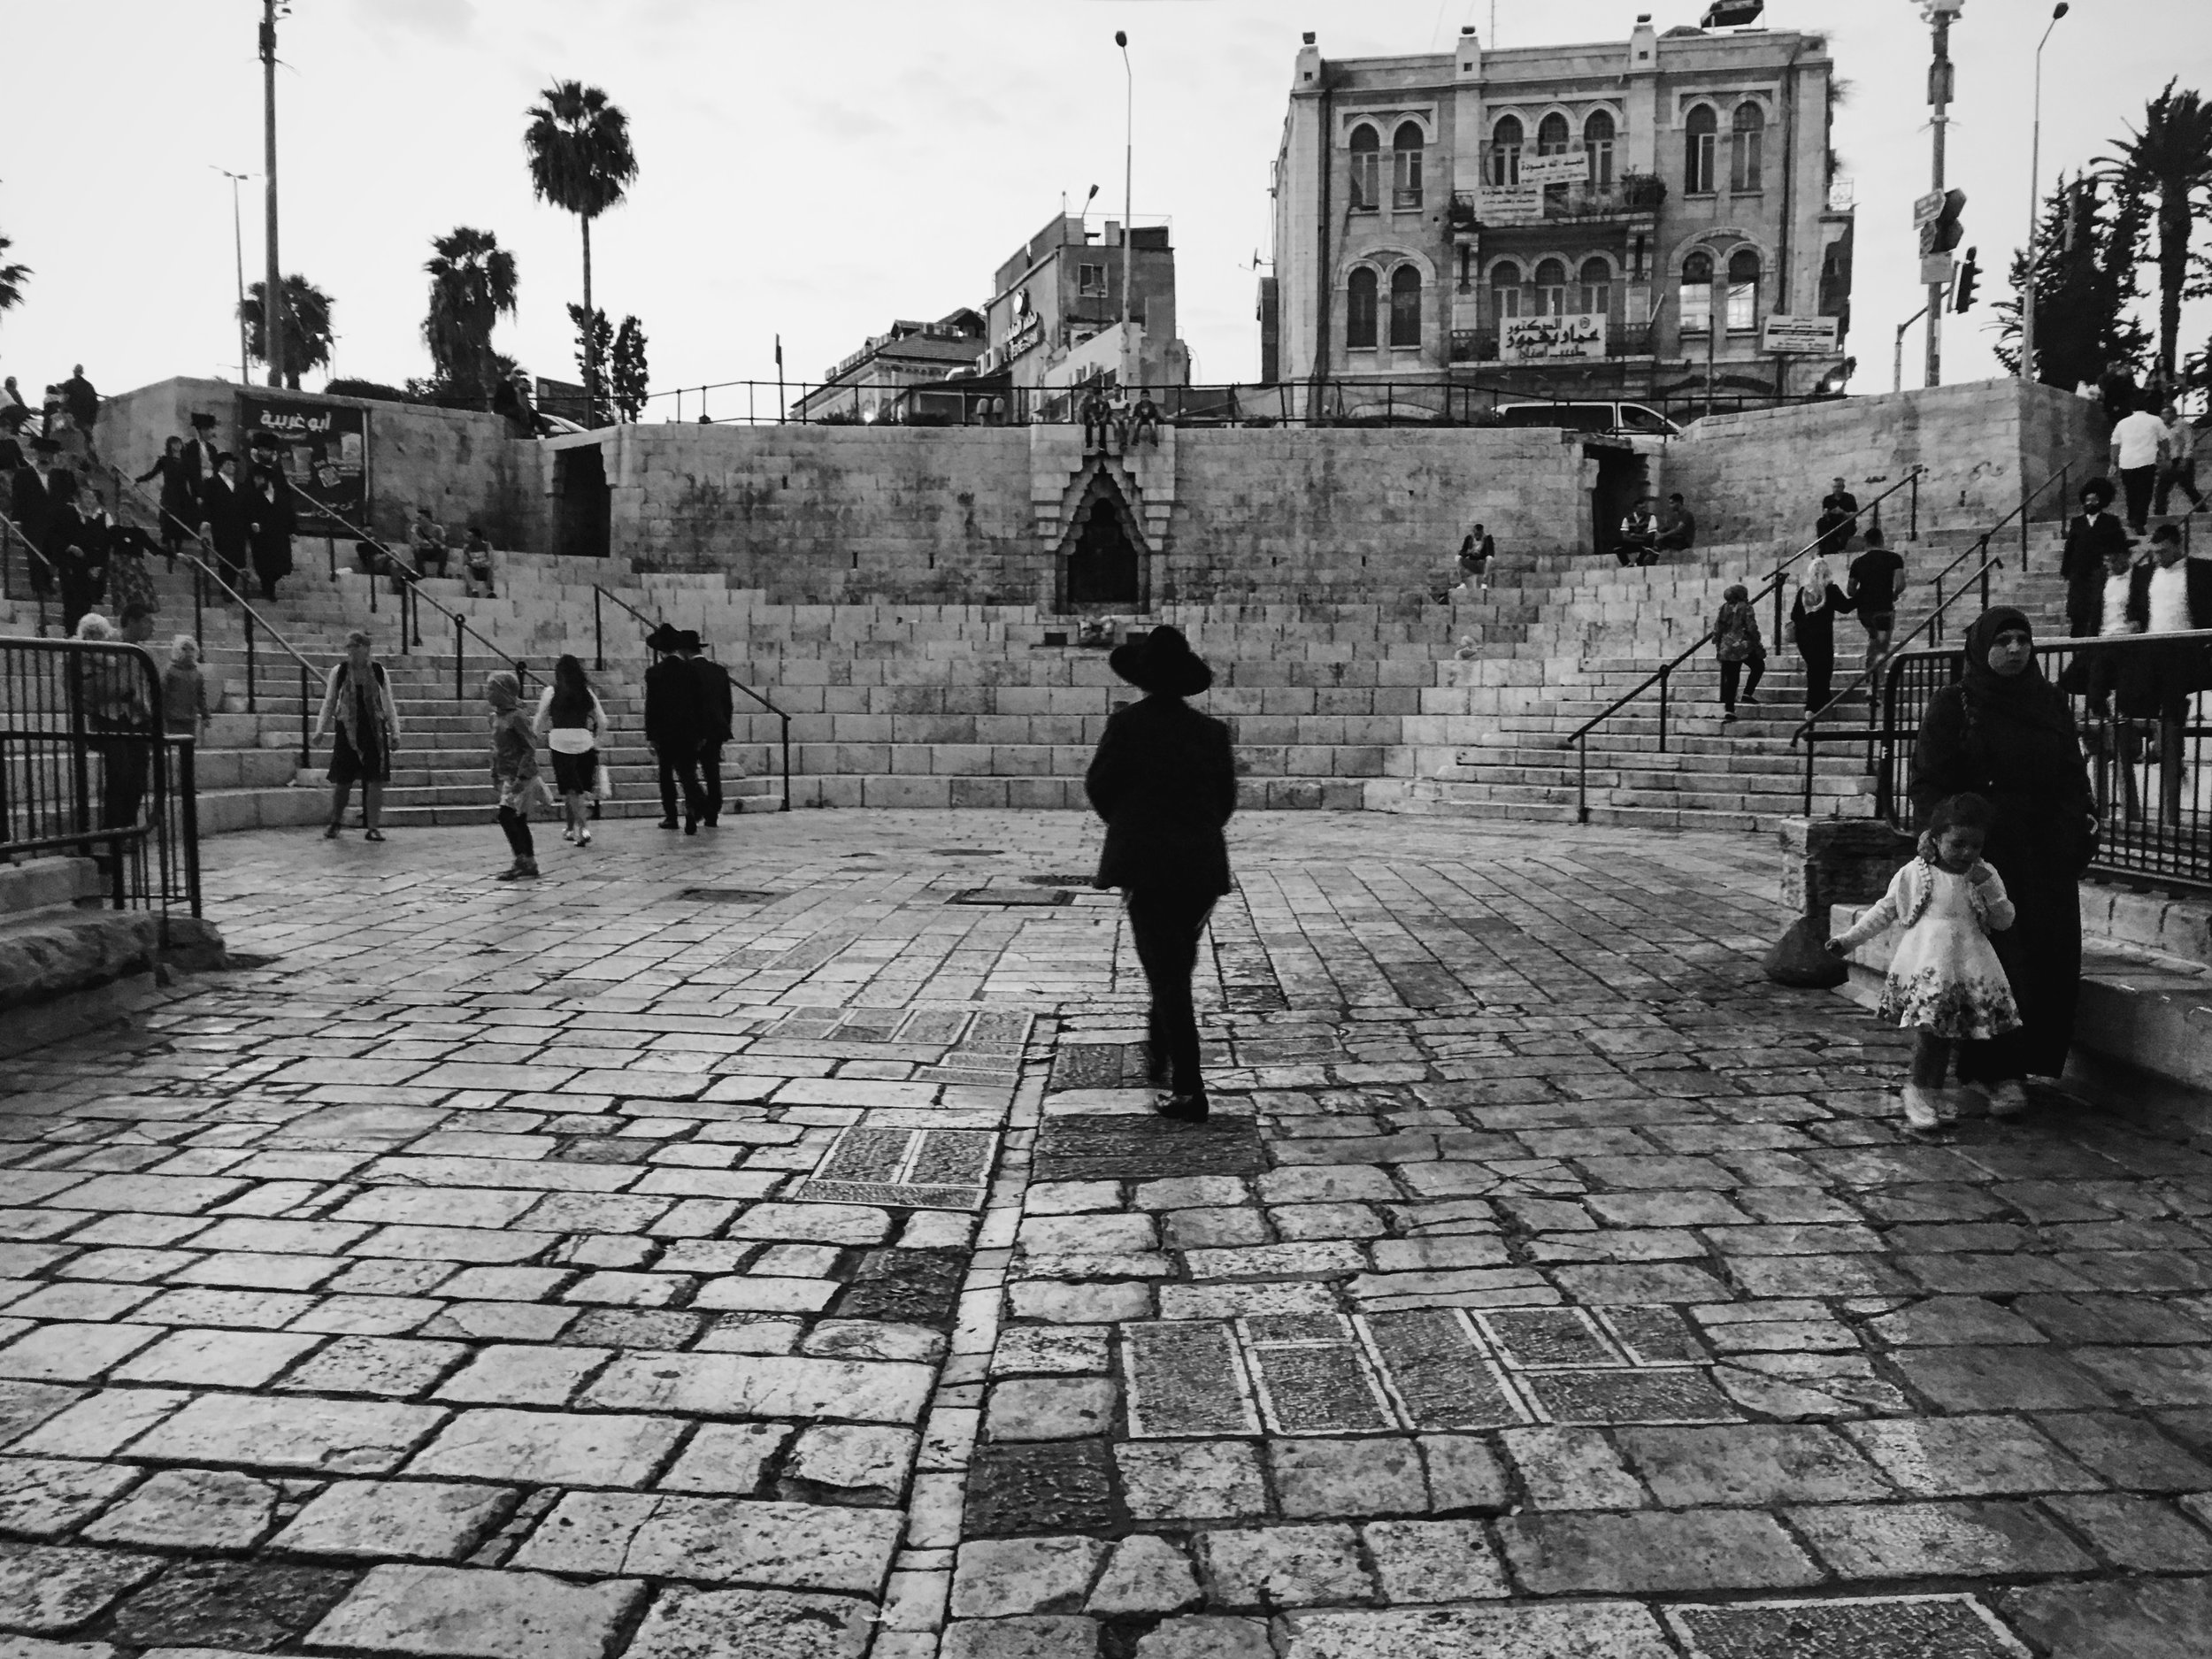  Damascus Gate in the Old City of Jerusalem has been a hotbed of tension in the past few years 